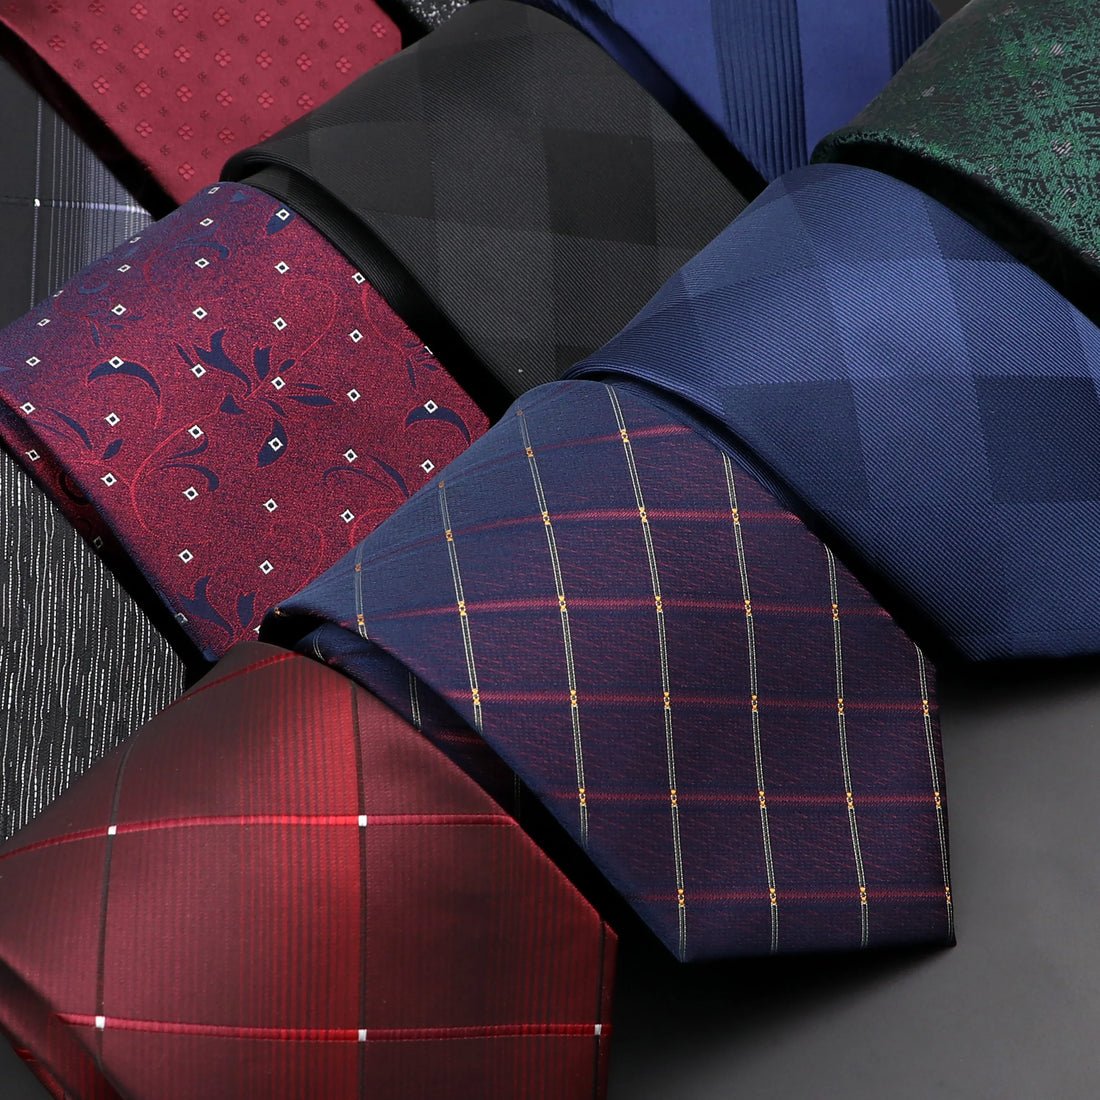 Striped &amp; Textured Ties for Formal Wear